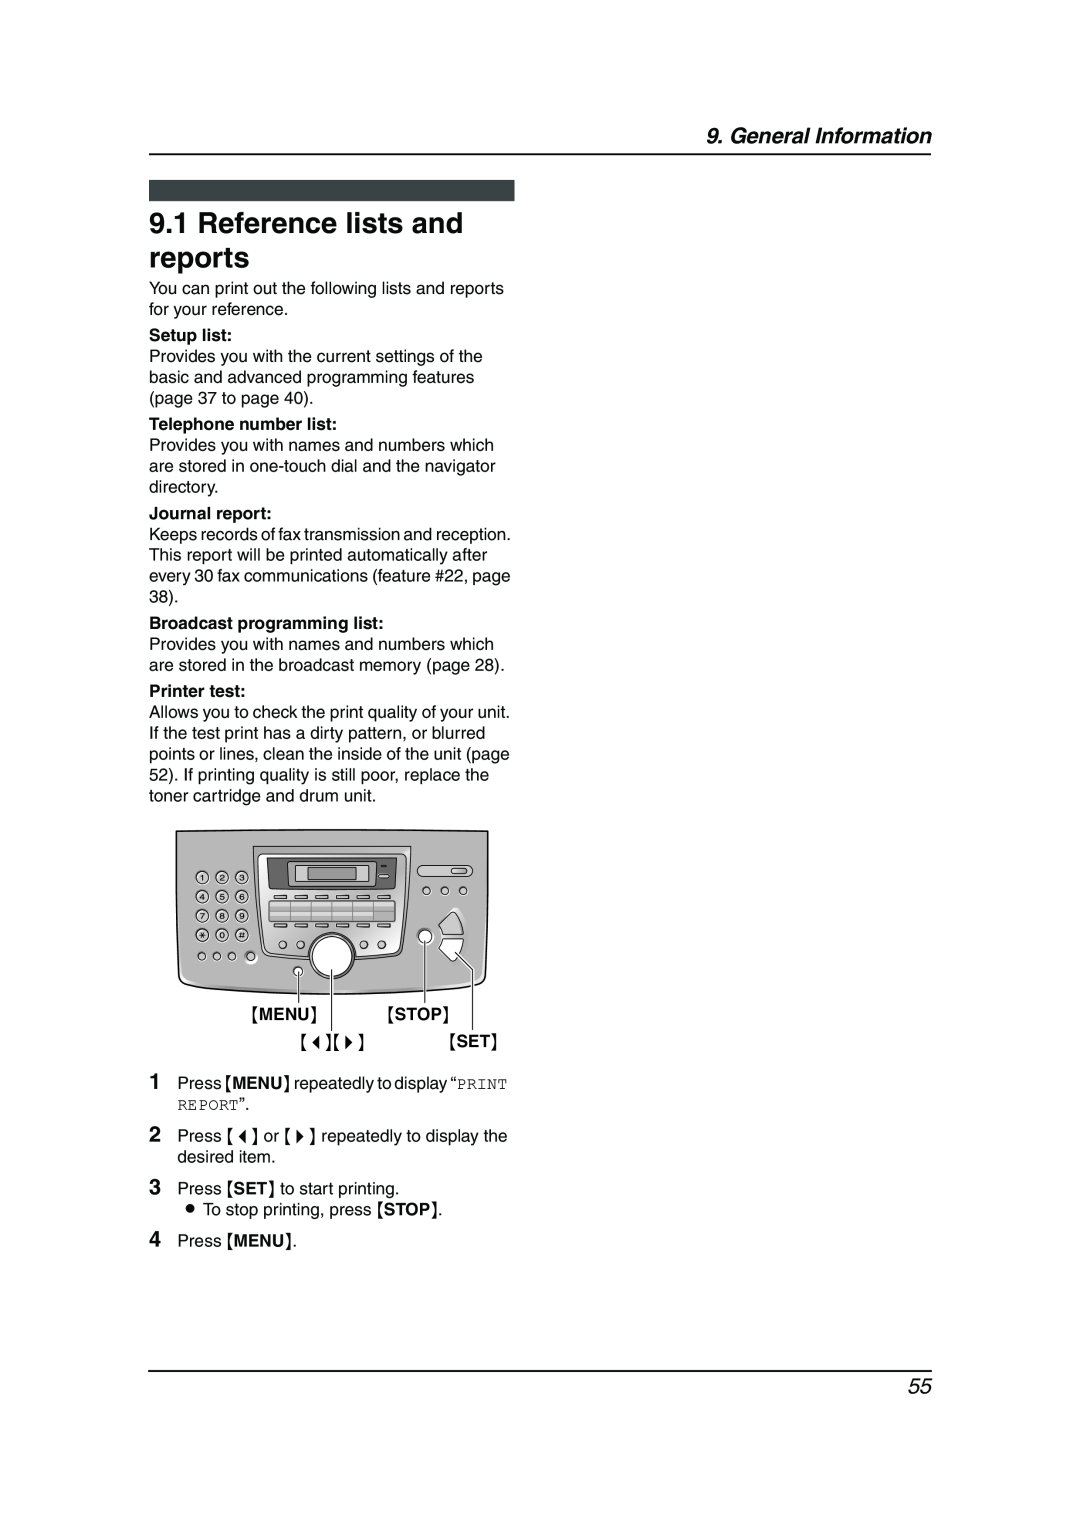 Panasonic KX-FL511AL manual Reference lists and reports, General Information 